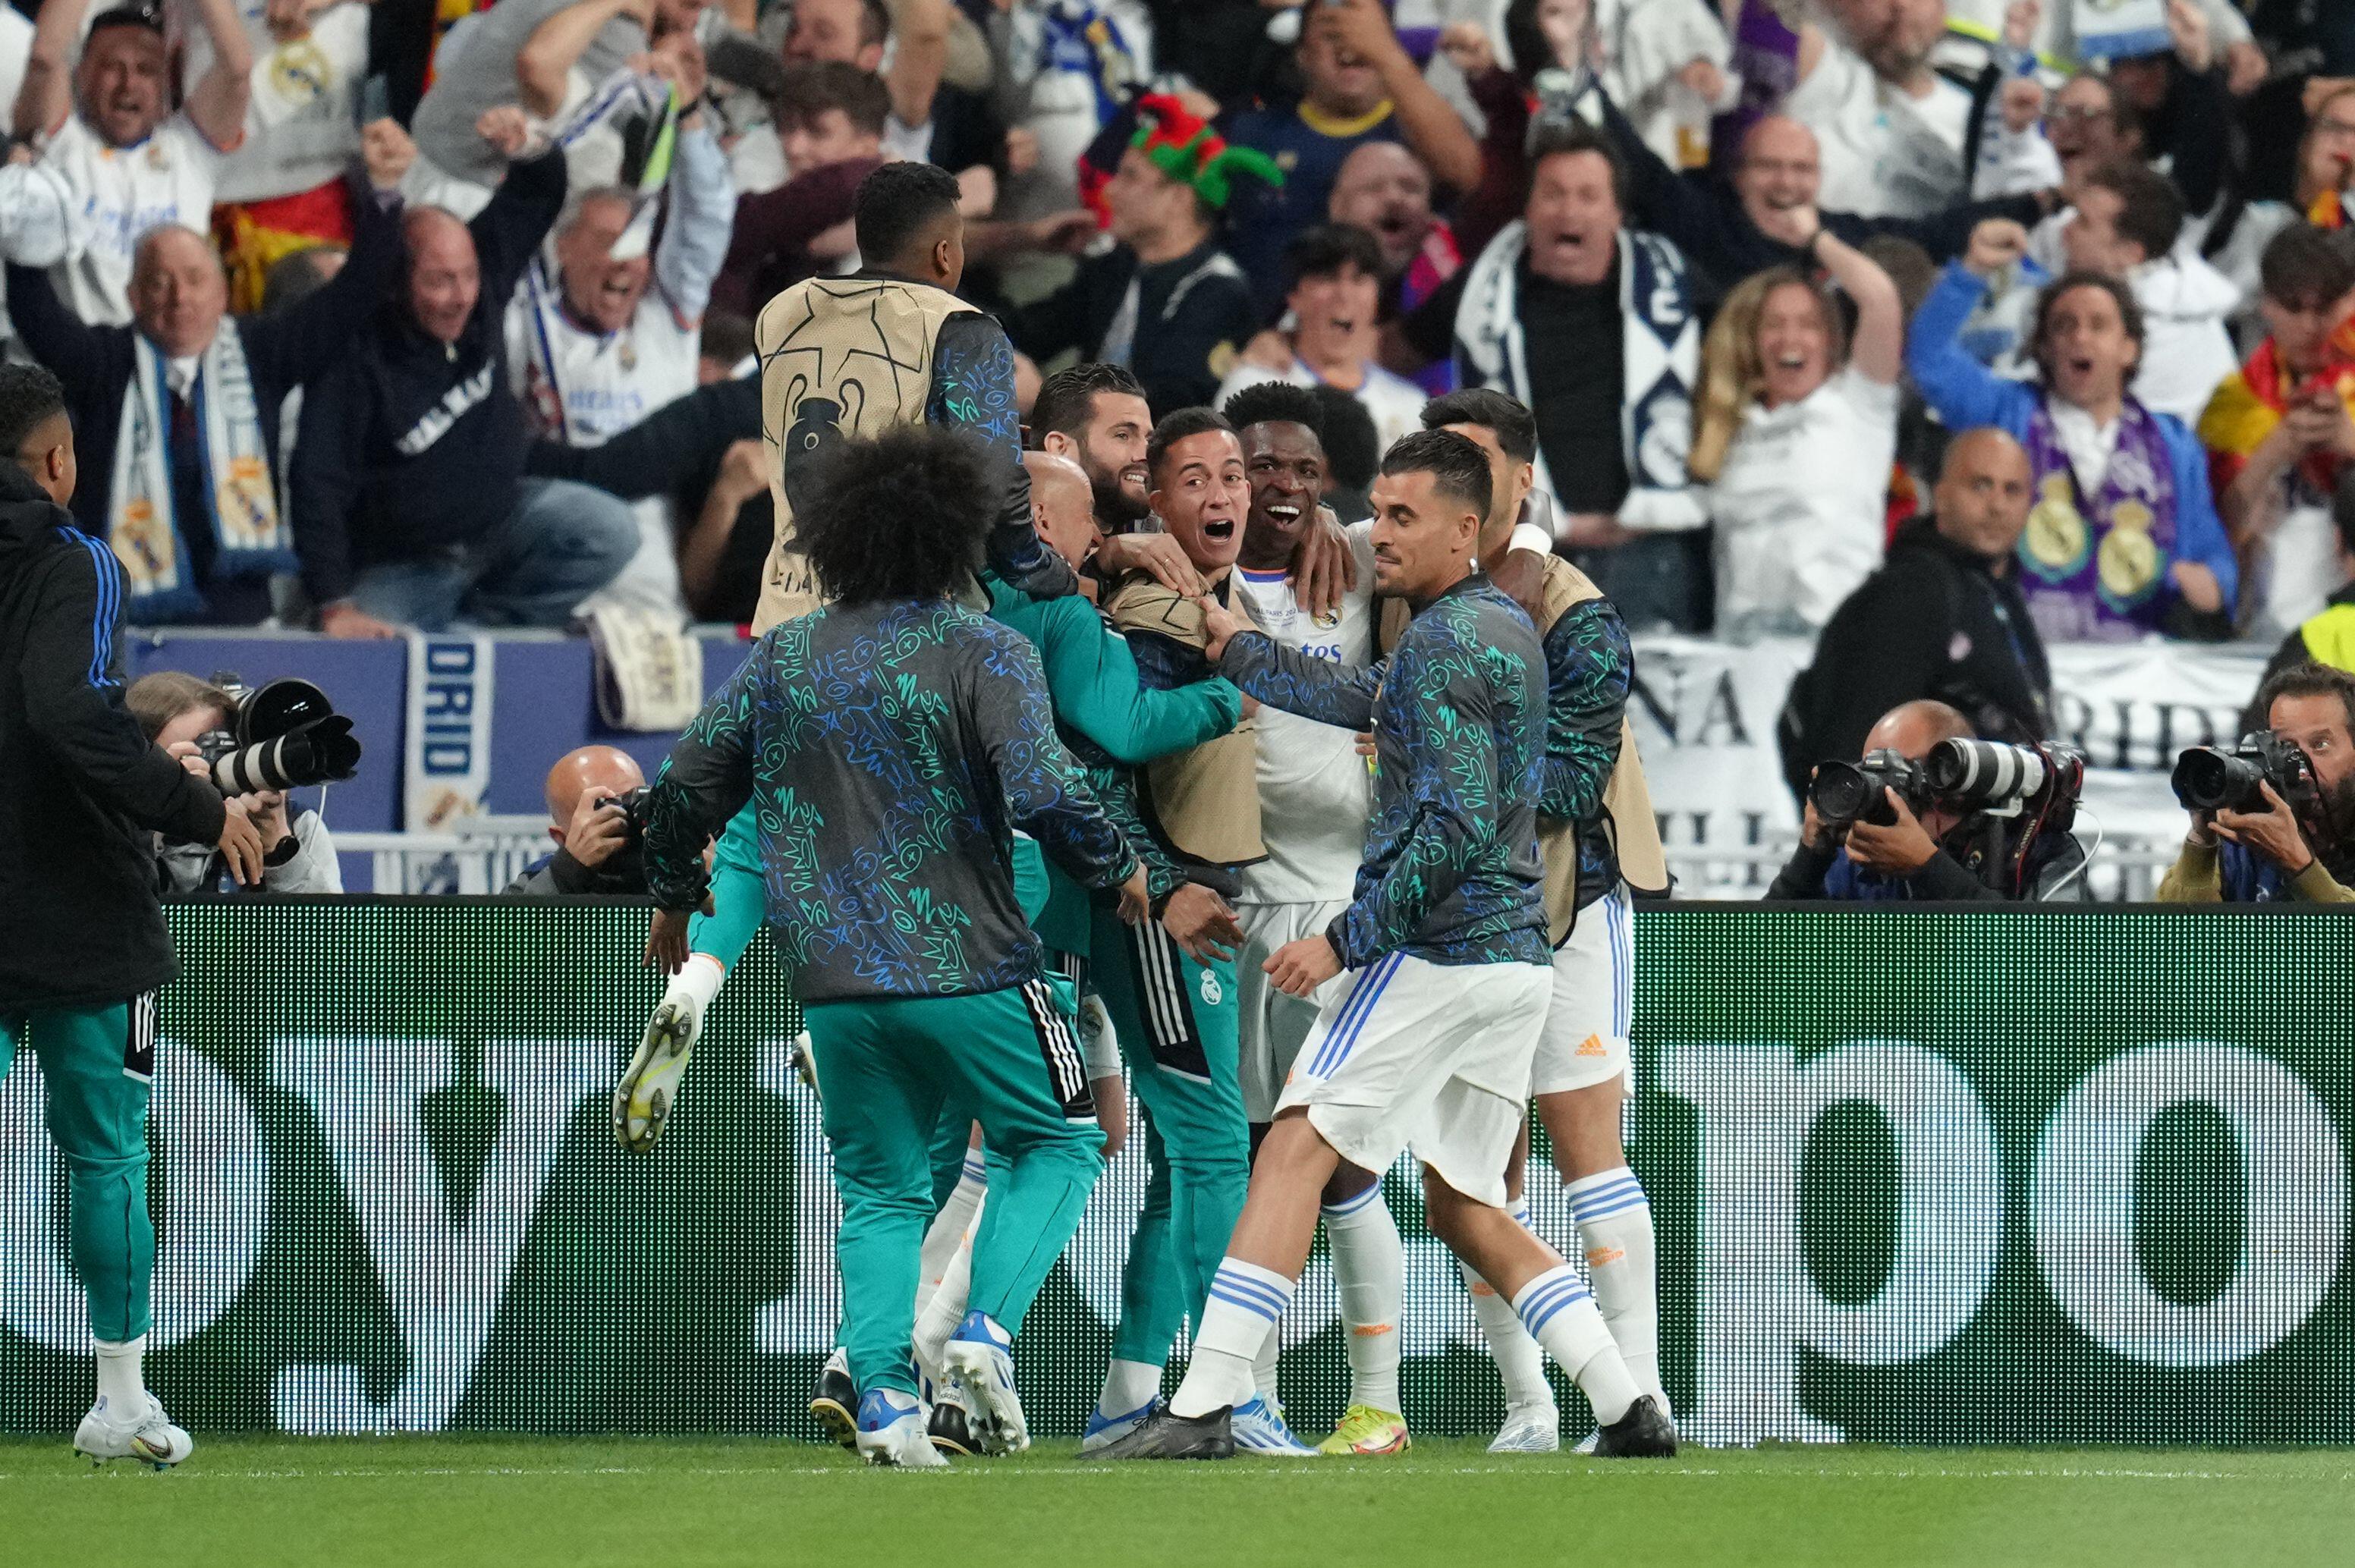 UEFA Champions League Final: Real Madrid beat Liverpool 1-0 to win 14th CHAMPIONS LEAGUE title, Vinicius Junior scores the winner, Watch HIGHLIGHTS